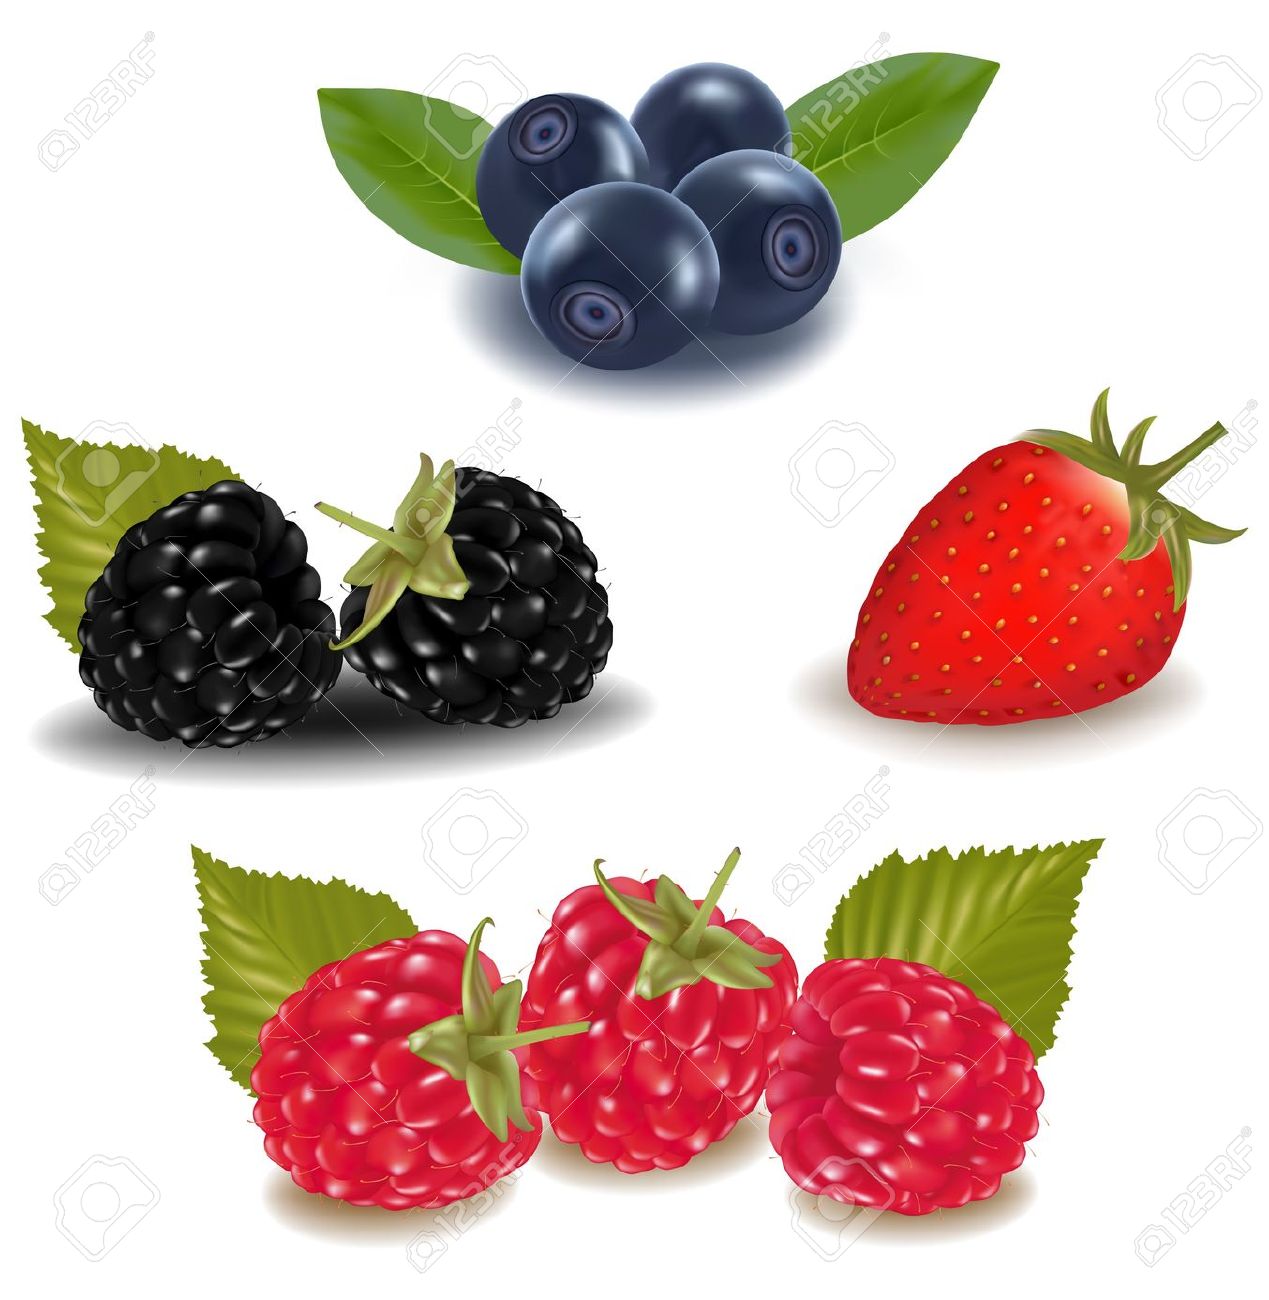 Blueberry clipart vector. Blackberry fruit pencil and